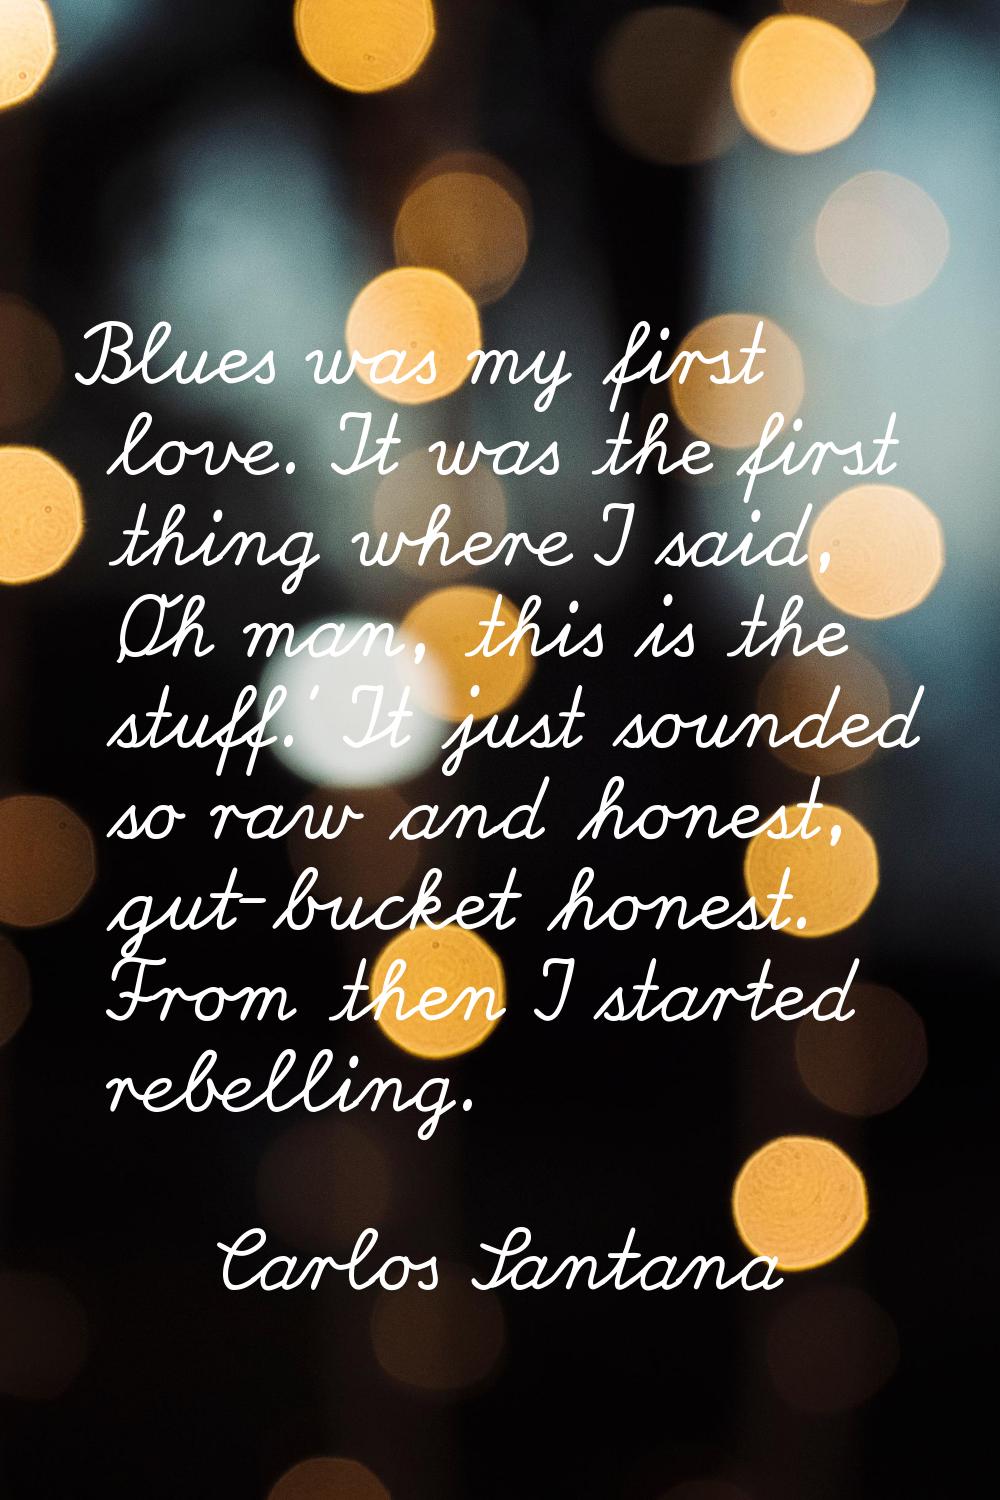 Blues was my first love. It was the first thing where I said, 'Oh man, this is the stuff.' It just 